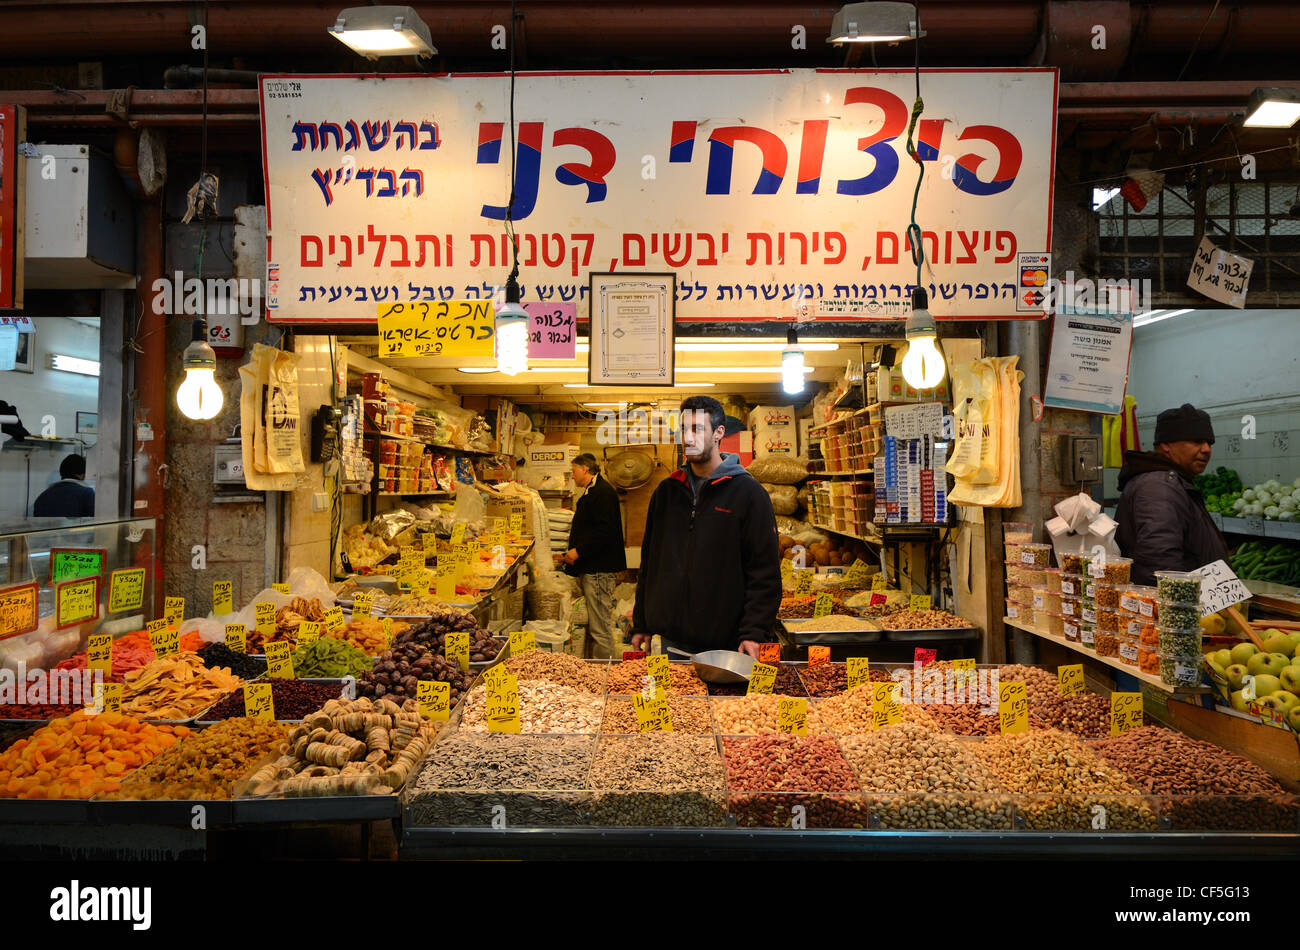 An Israeli vendor sells dried fruits and nuts in a Jerusalem suq. Stock Photo